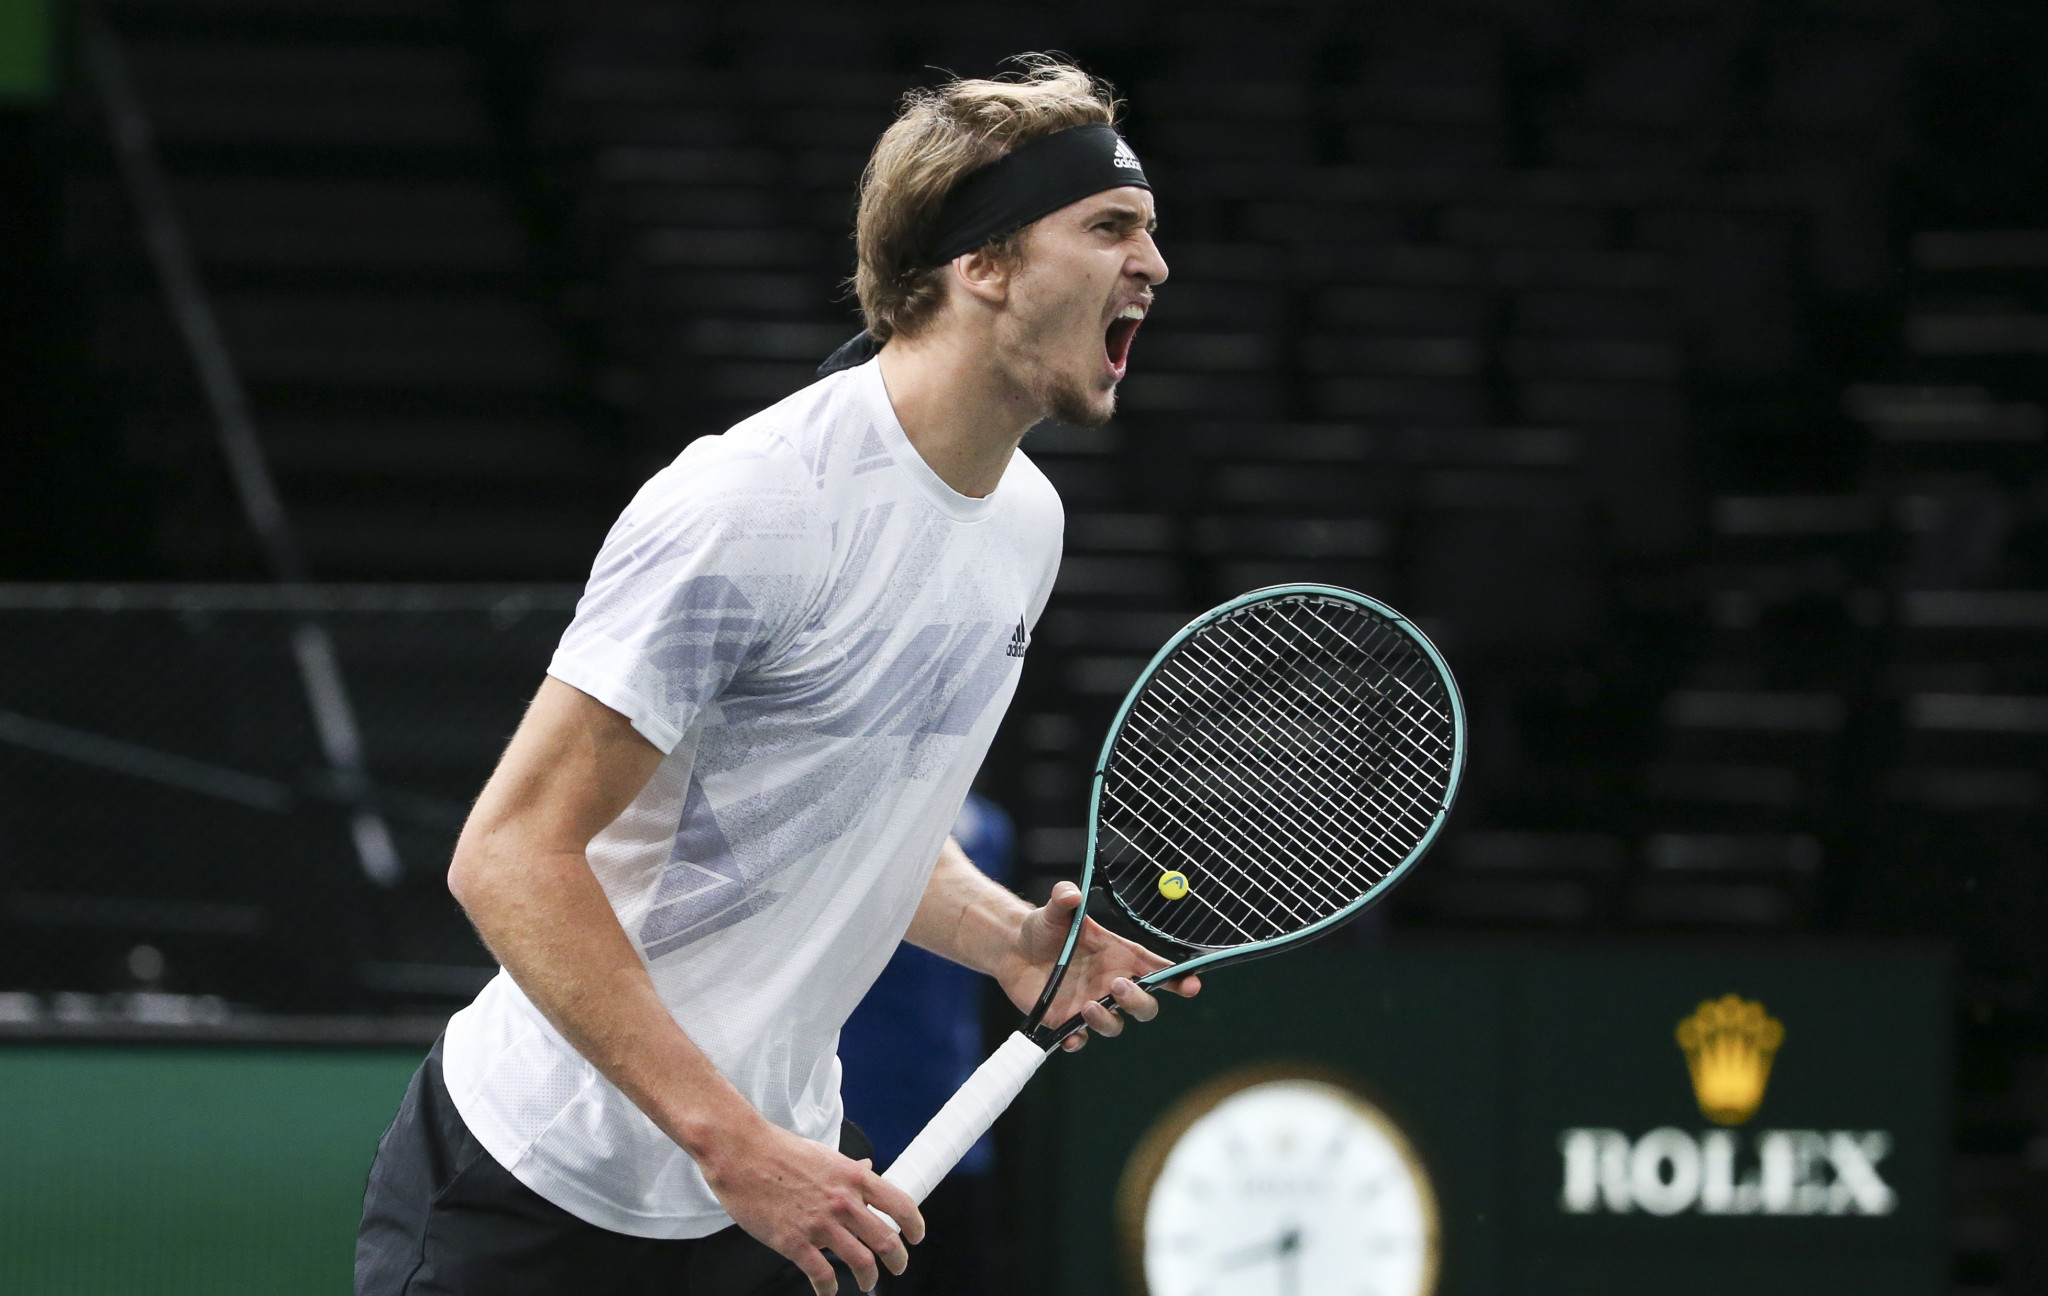 Alexander Zverev claimed a straight-sets victory over Rafael Nadal in the semi-finals of the Paris Masters ©Getty Images